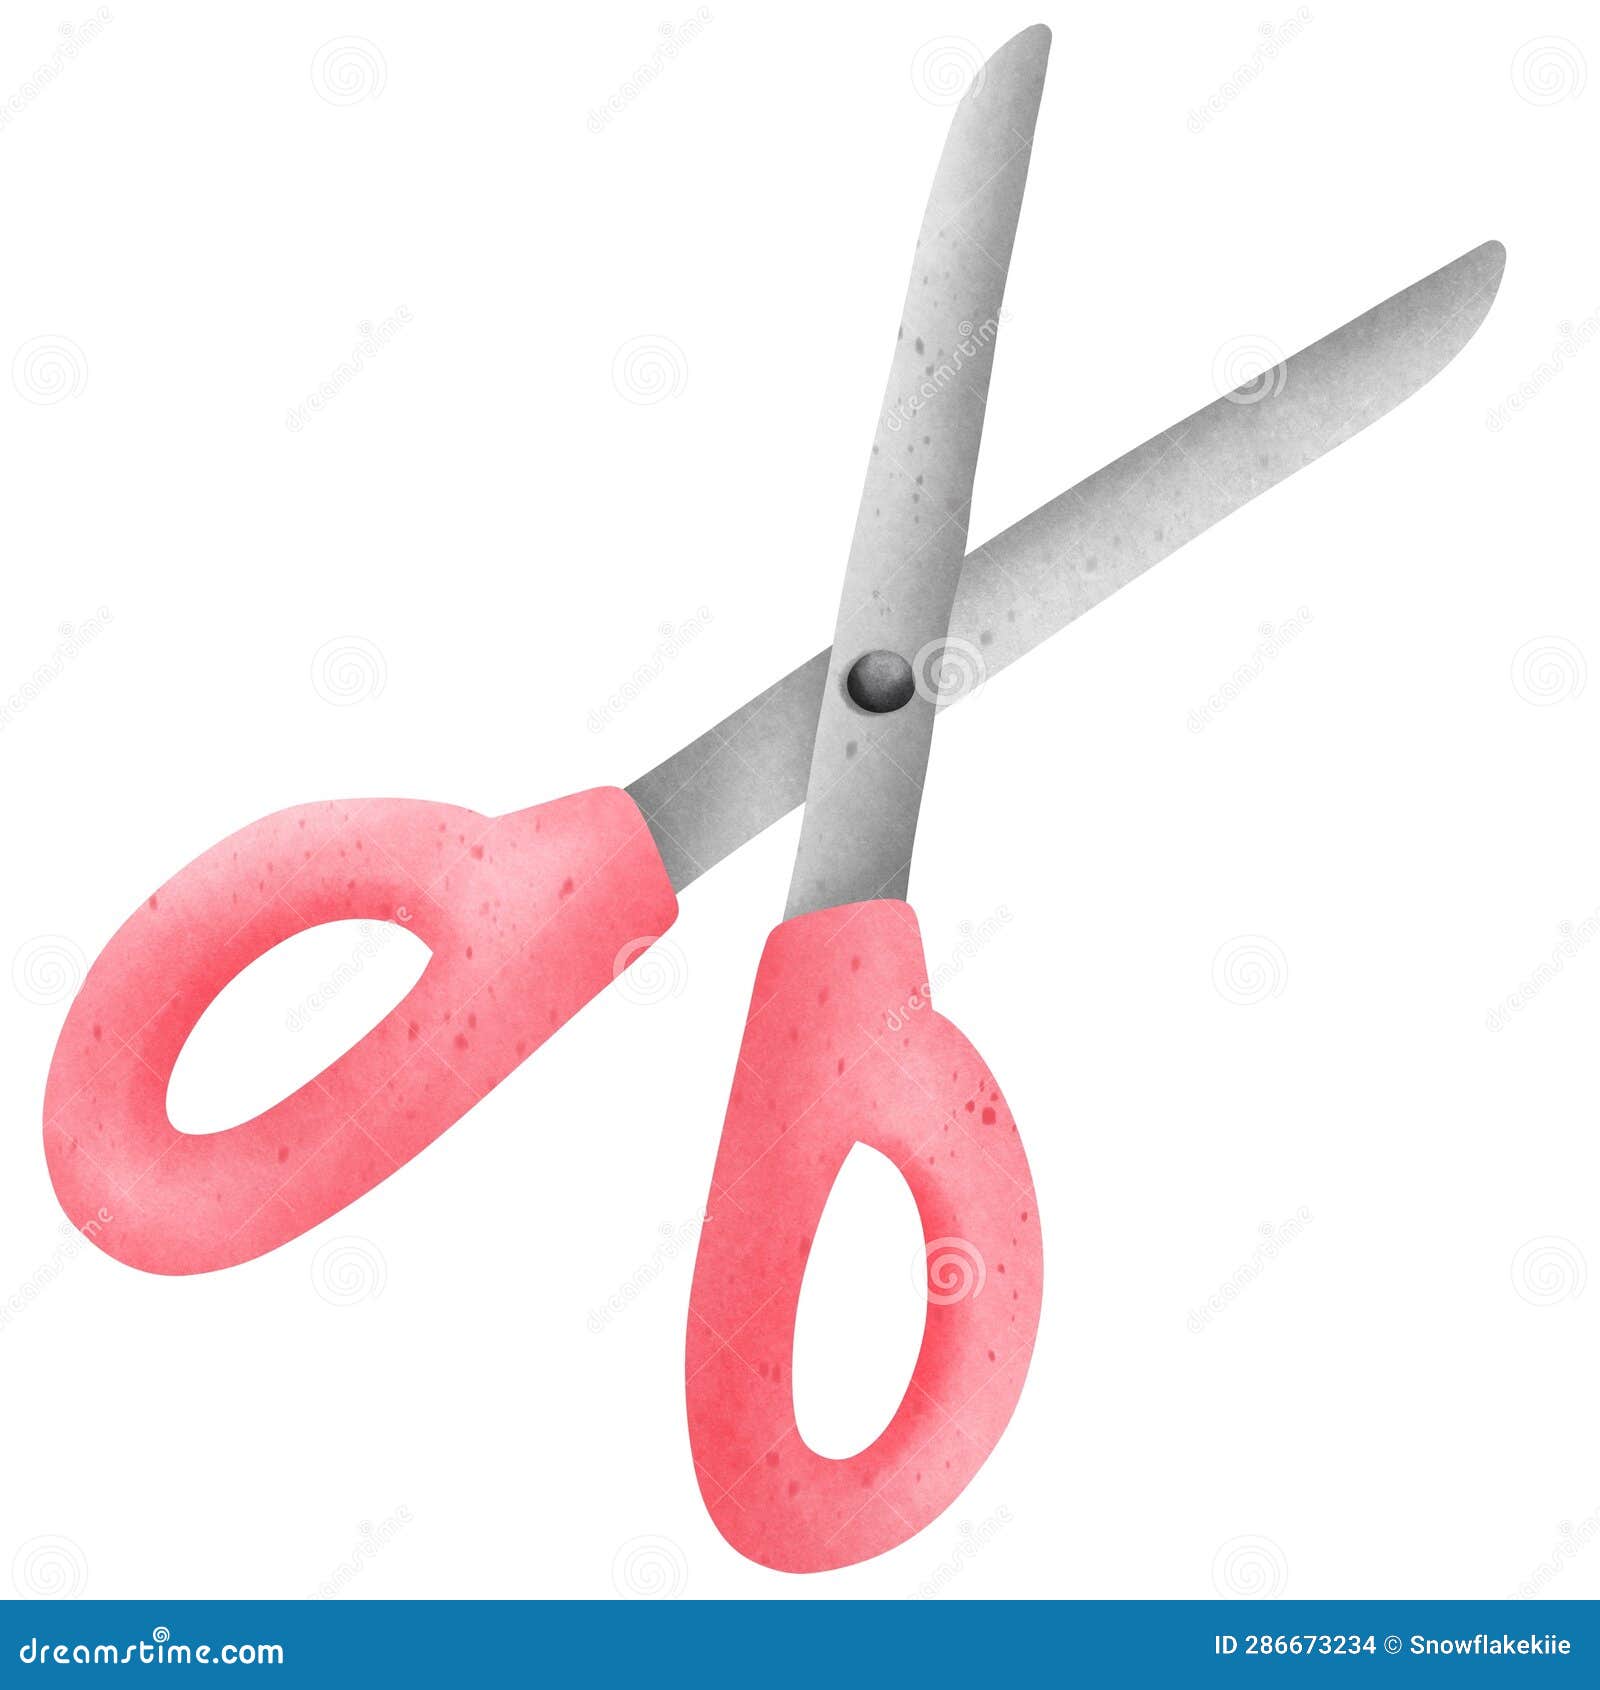 Cute Pink Pastel Scissors Cutter in Watercolor Style Stock Photo